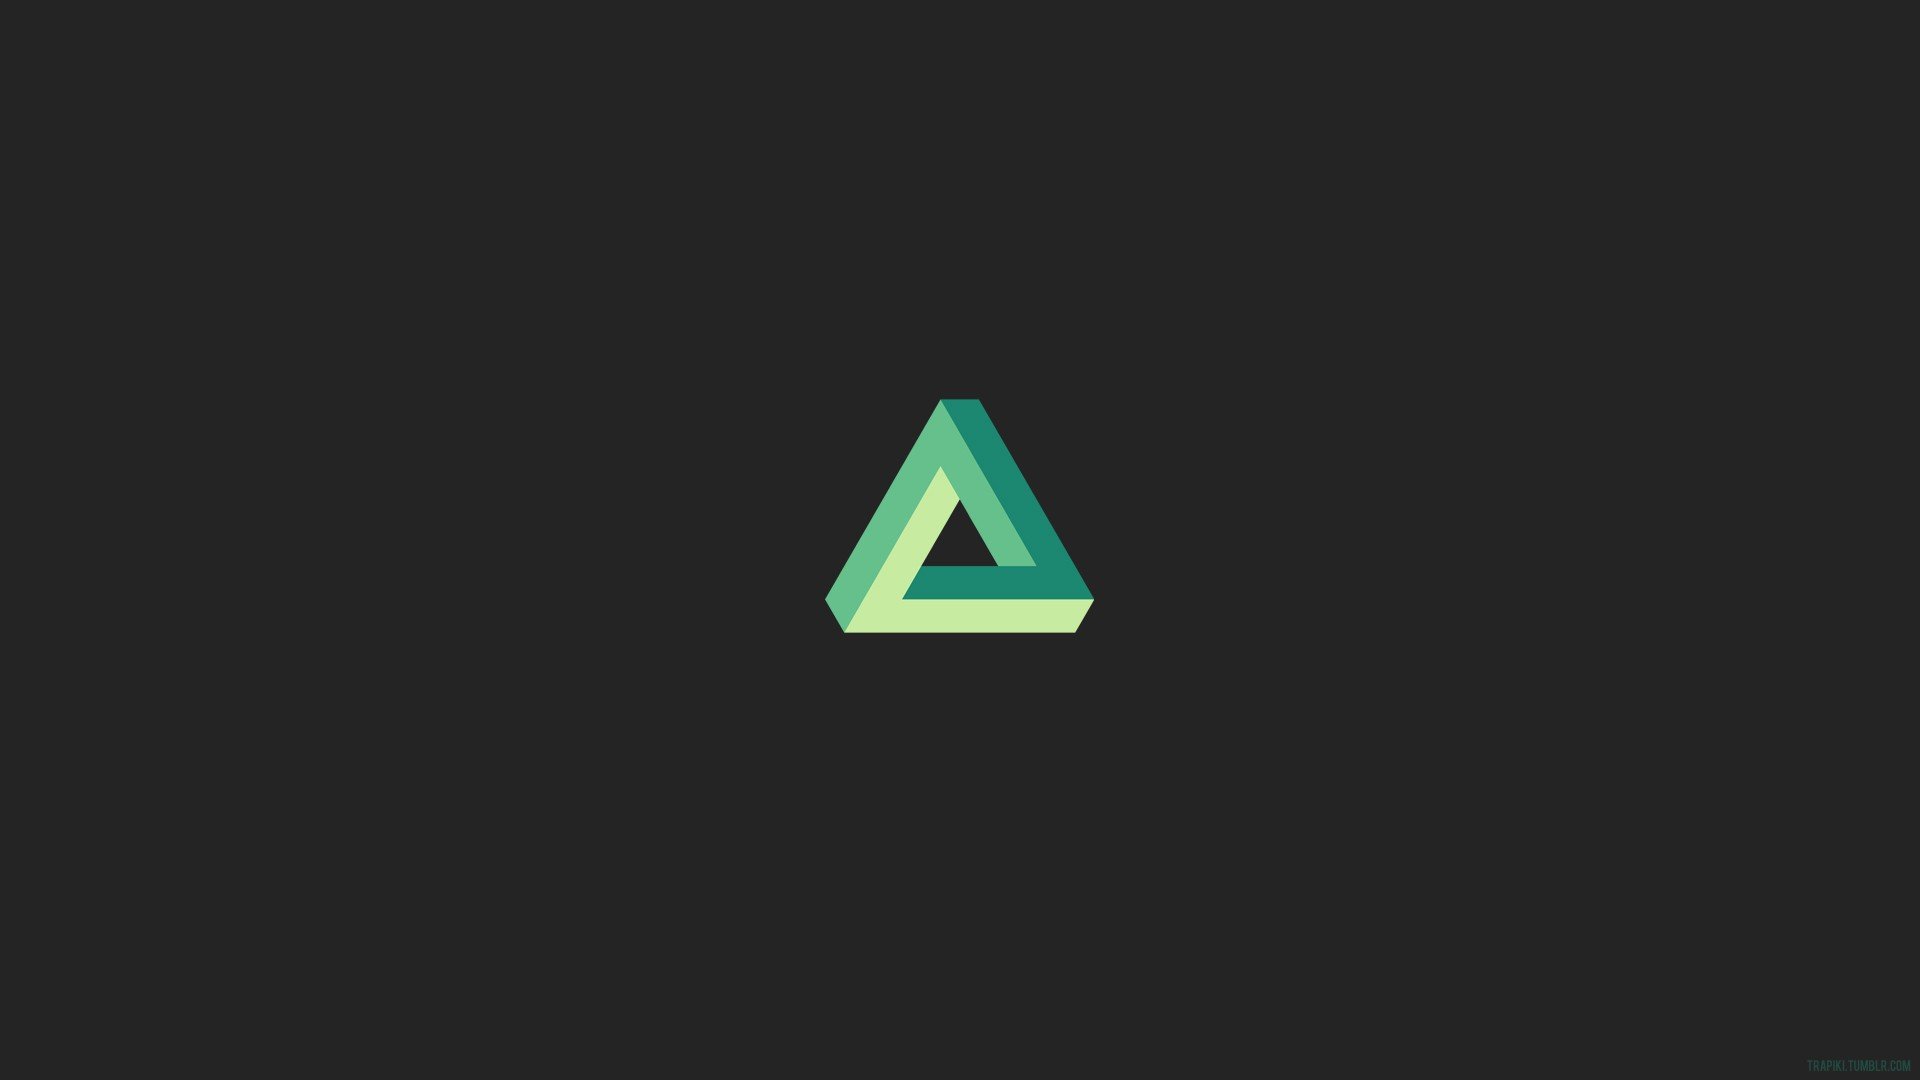 Hipster Triangle Wallpapers